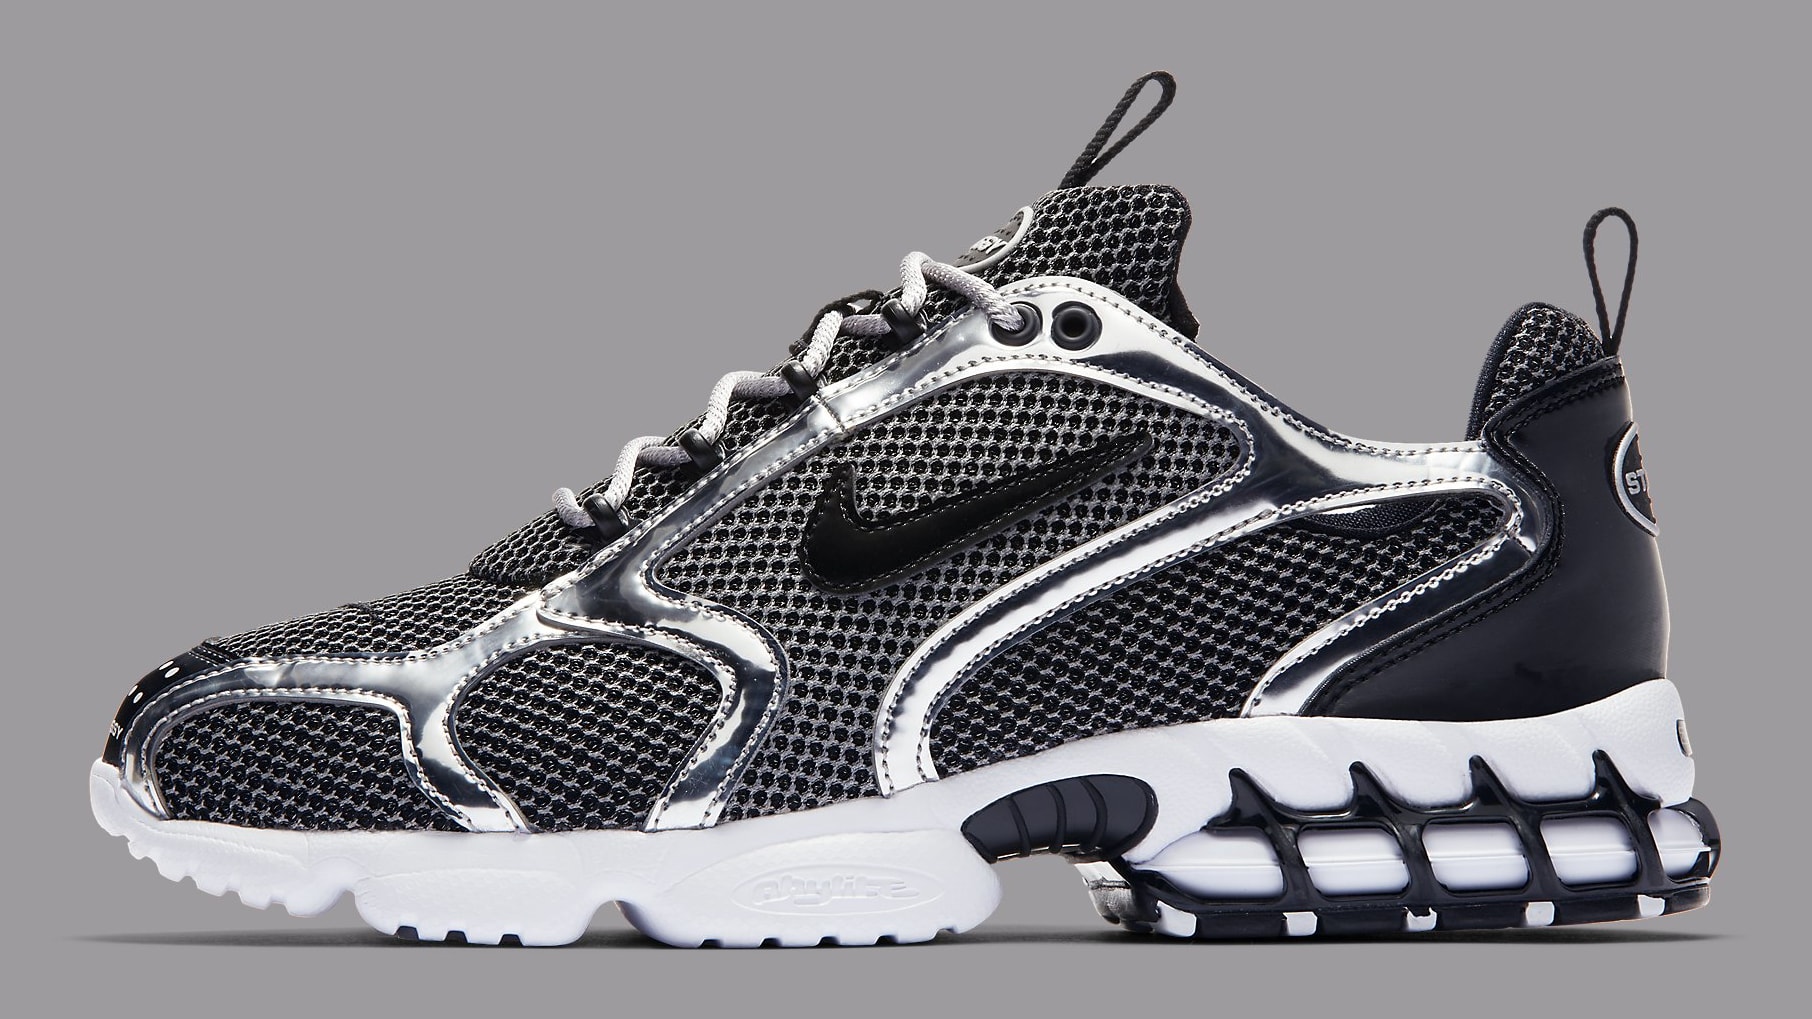 The Third Stussy x Nike Air Zoom Spiridon Cage 2 Releases This 